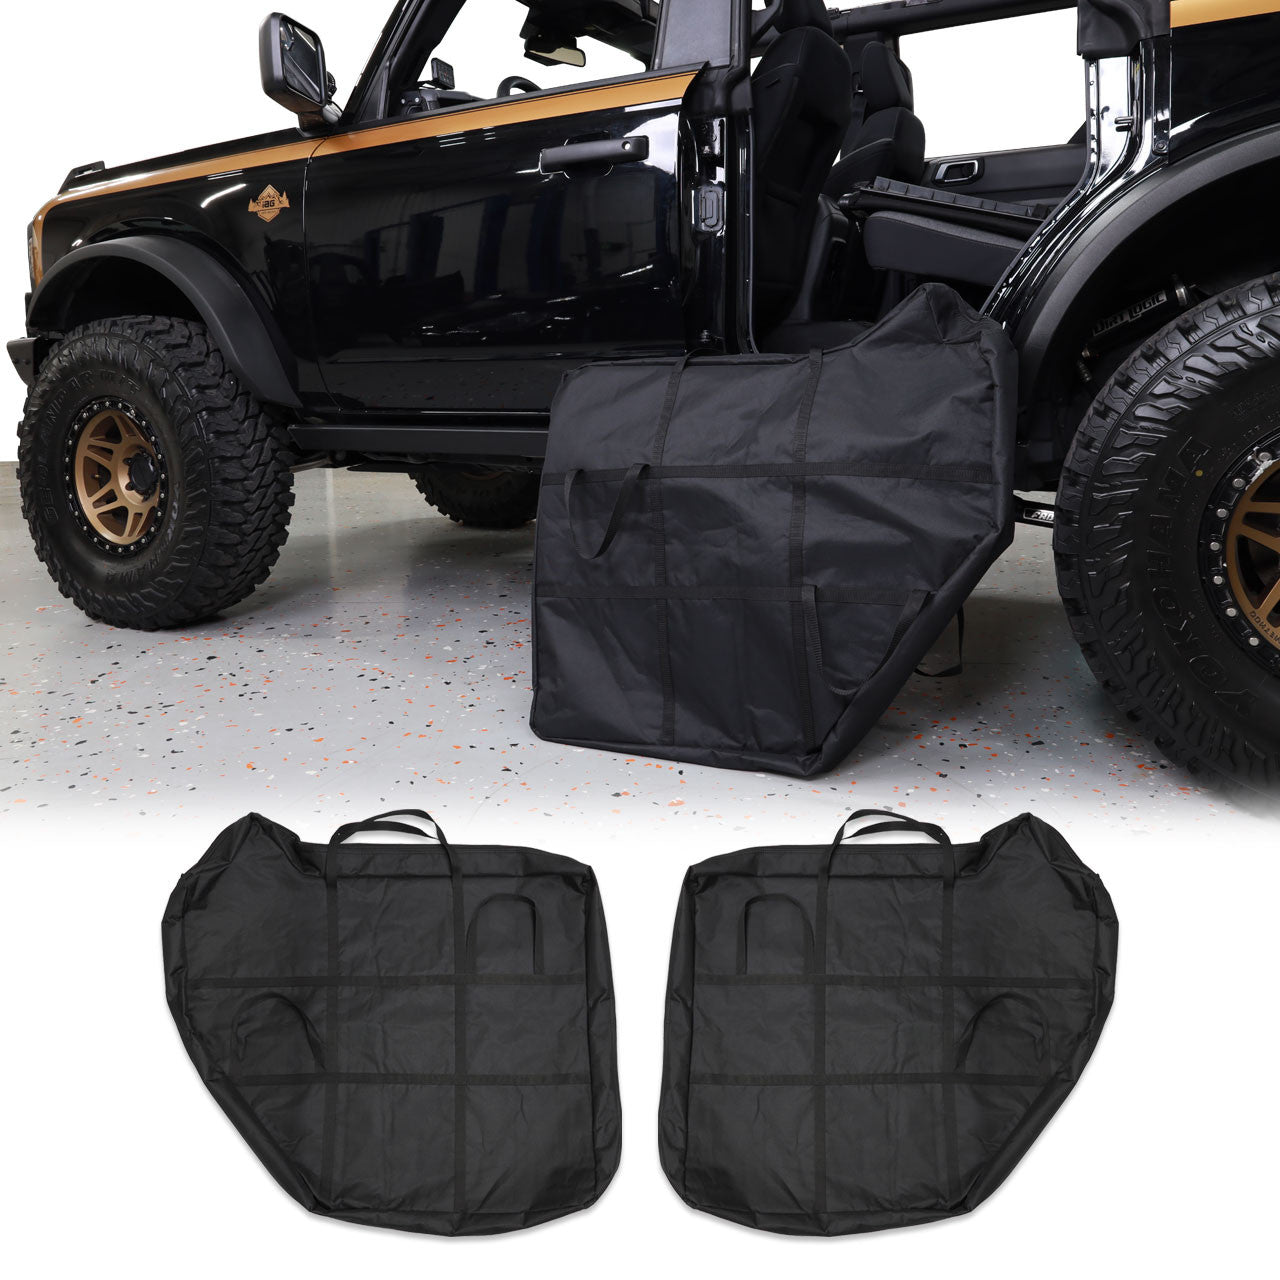 Where to Get the On Board Door Storage Bags Or The Bags to Help Get  the Doors Off  Bronco6G  2021 Ford Bronco  Bronco Raptor Forum News  Blog  Owners Community